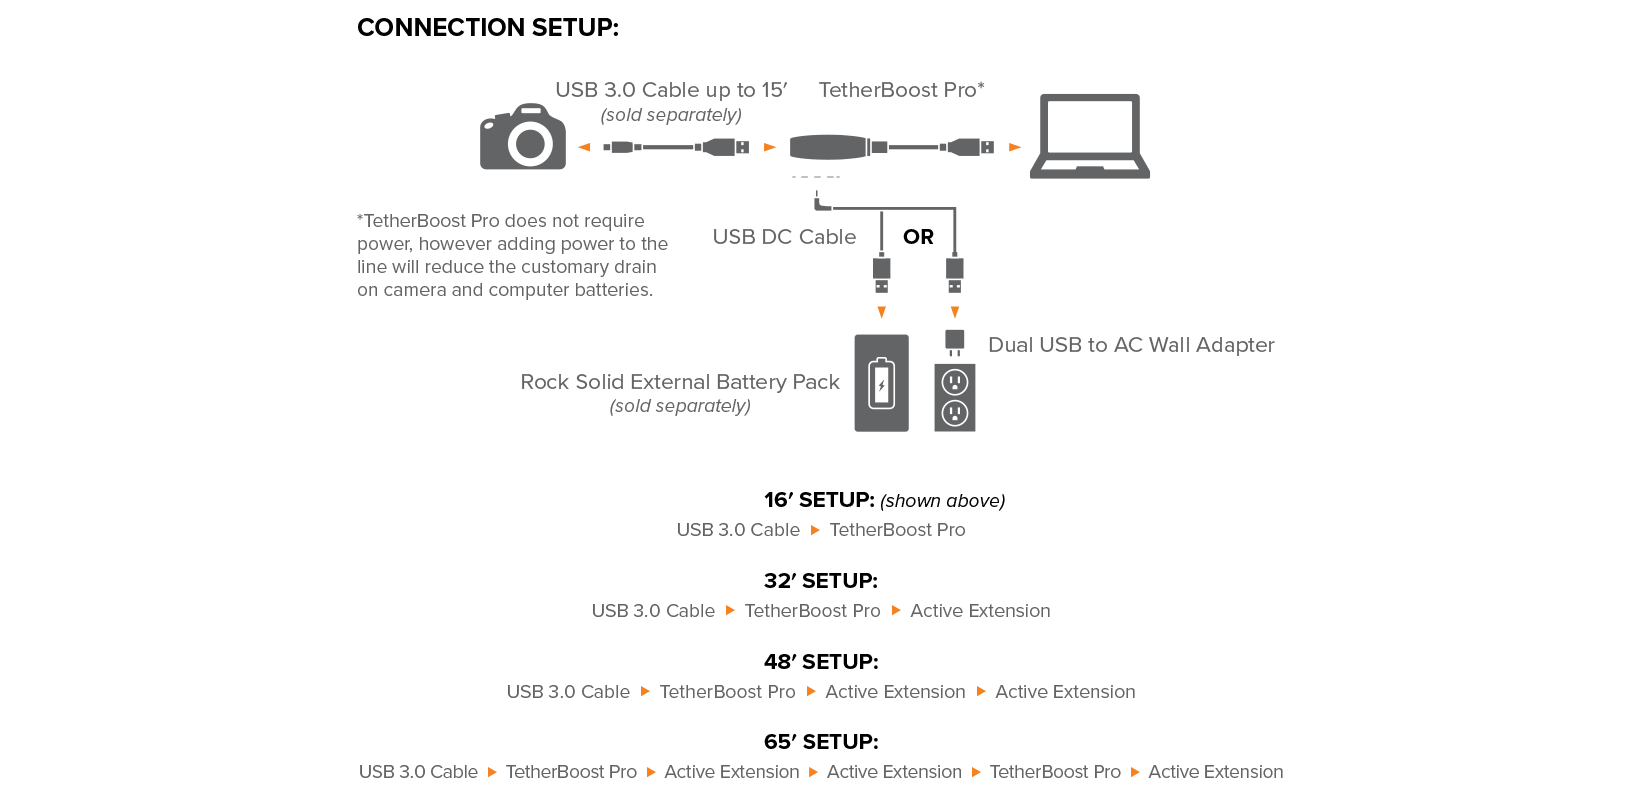 Tether Boost Pro configuration diagram